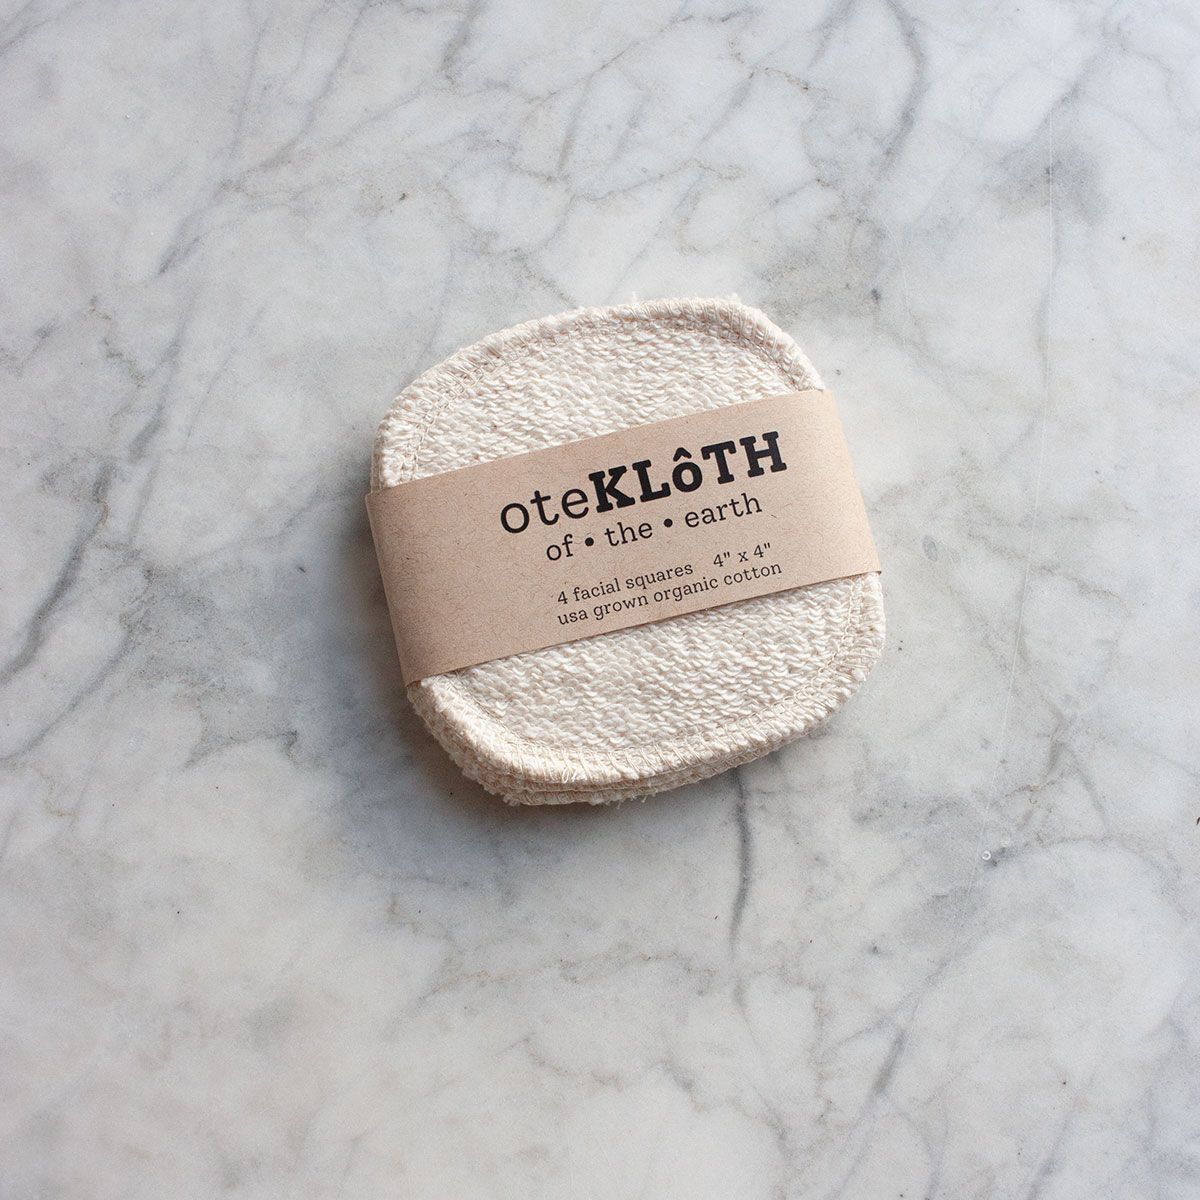 A set of woven, textured cotton squares are minimally packaged with a strip of brown paper reading: "oteKLôTH | of. the. earth | 4 facial squares 4" x 4" | usa grown organic cotton" are placed at a slight angle on a marble counter top.